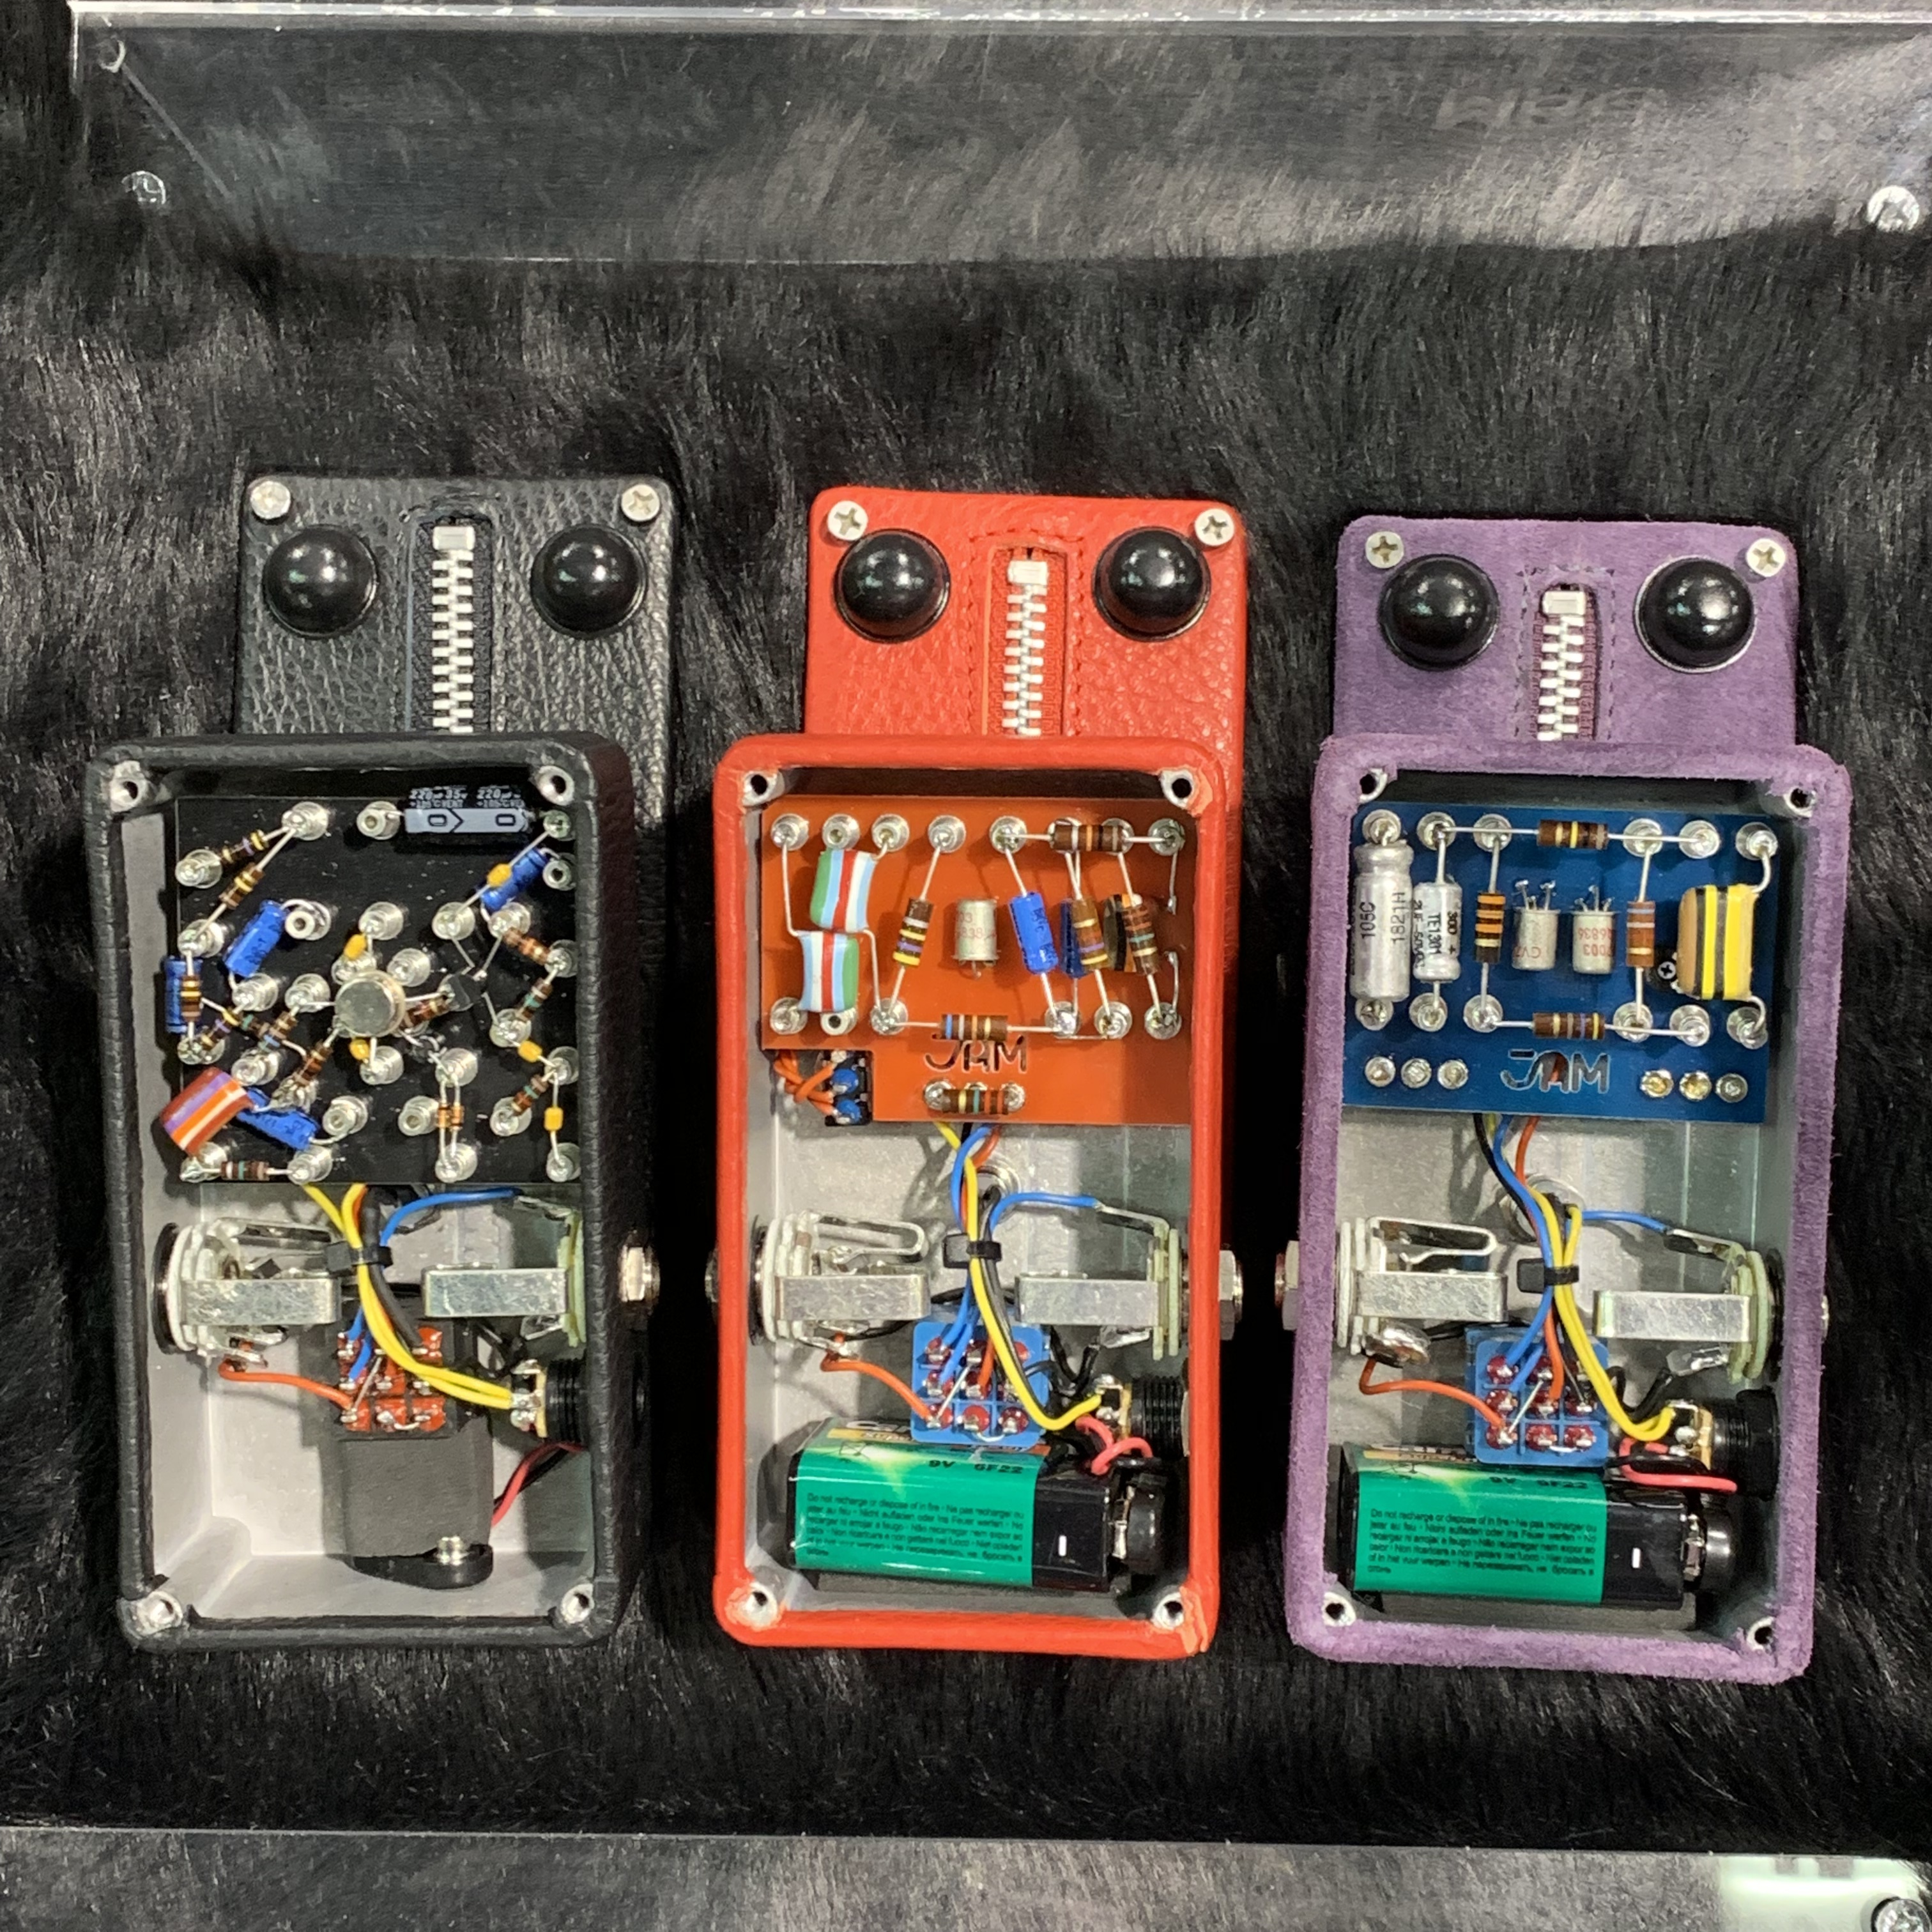 NAMM 2019 - Day 4 - Last day of the show